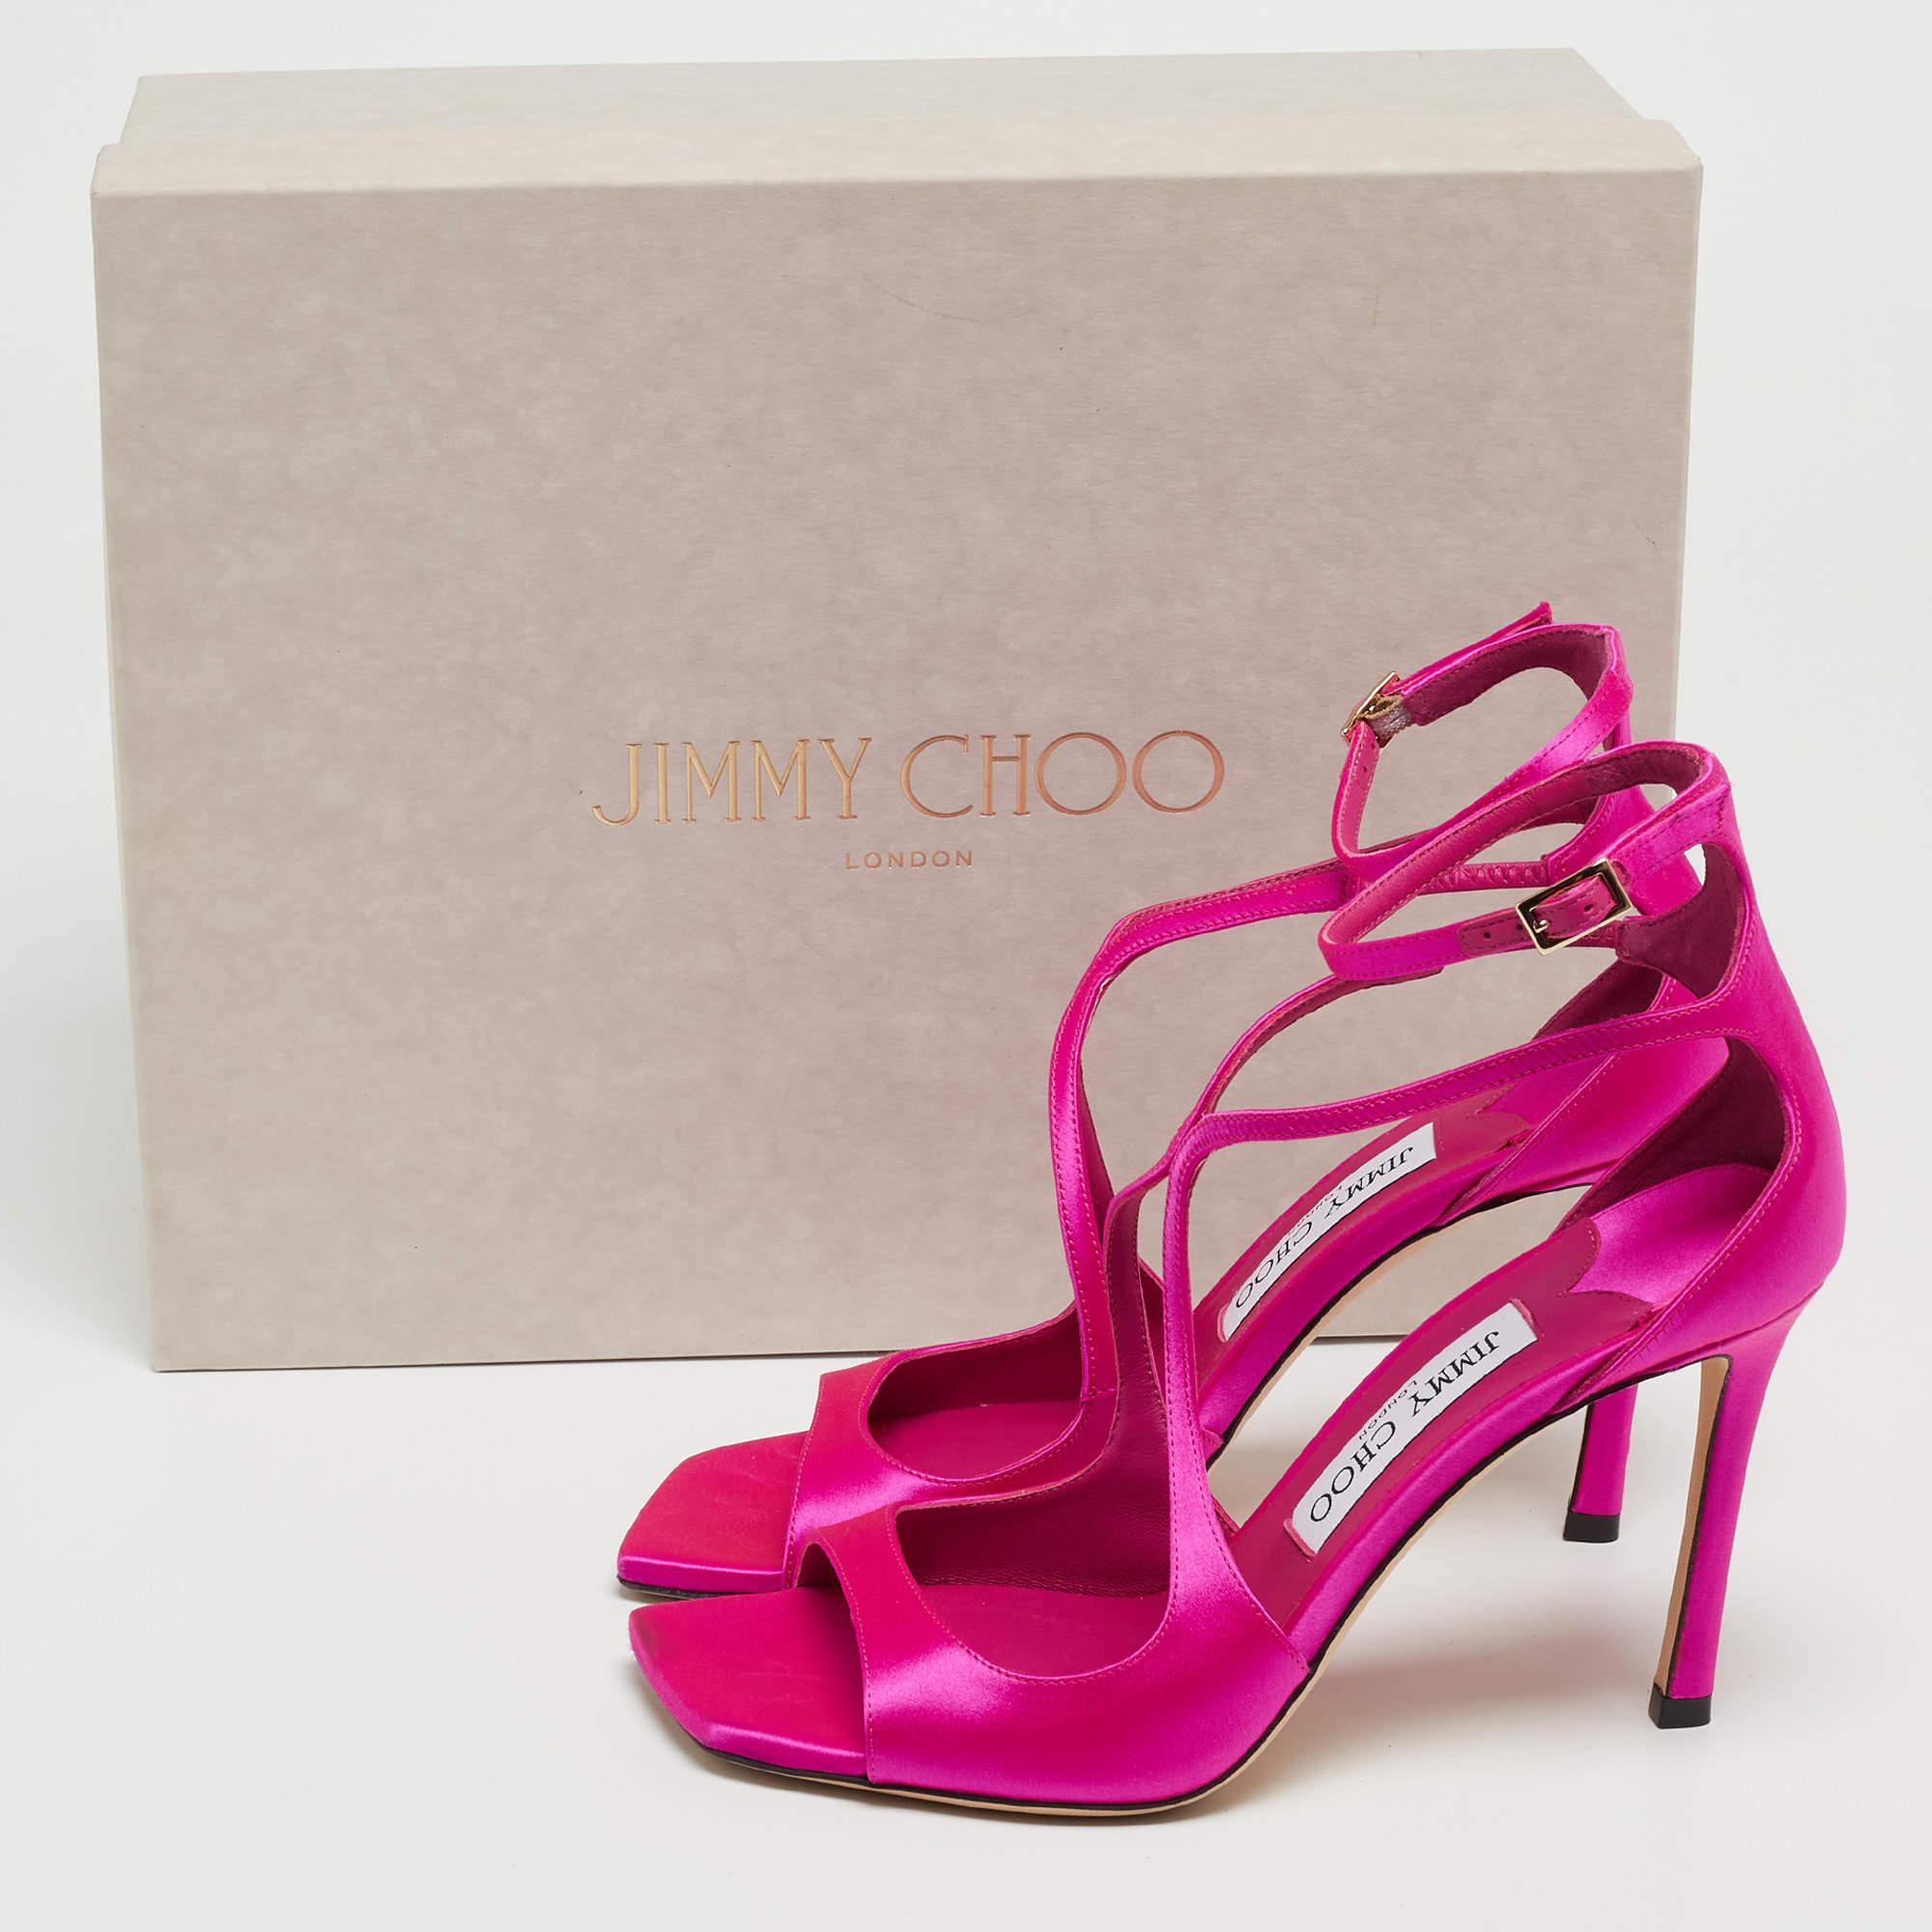 Jimmy Choo Pink Satin Azia 95 Ankle Strap Sandals Size 36.5 For Sale 5